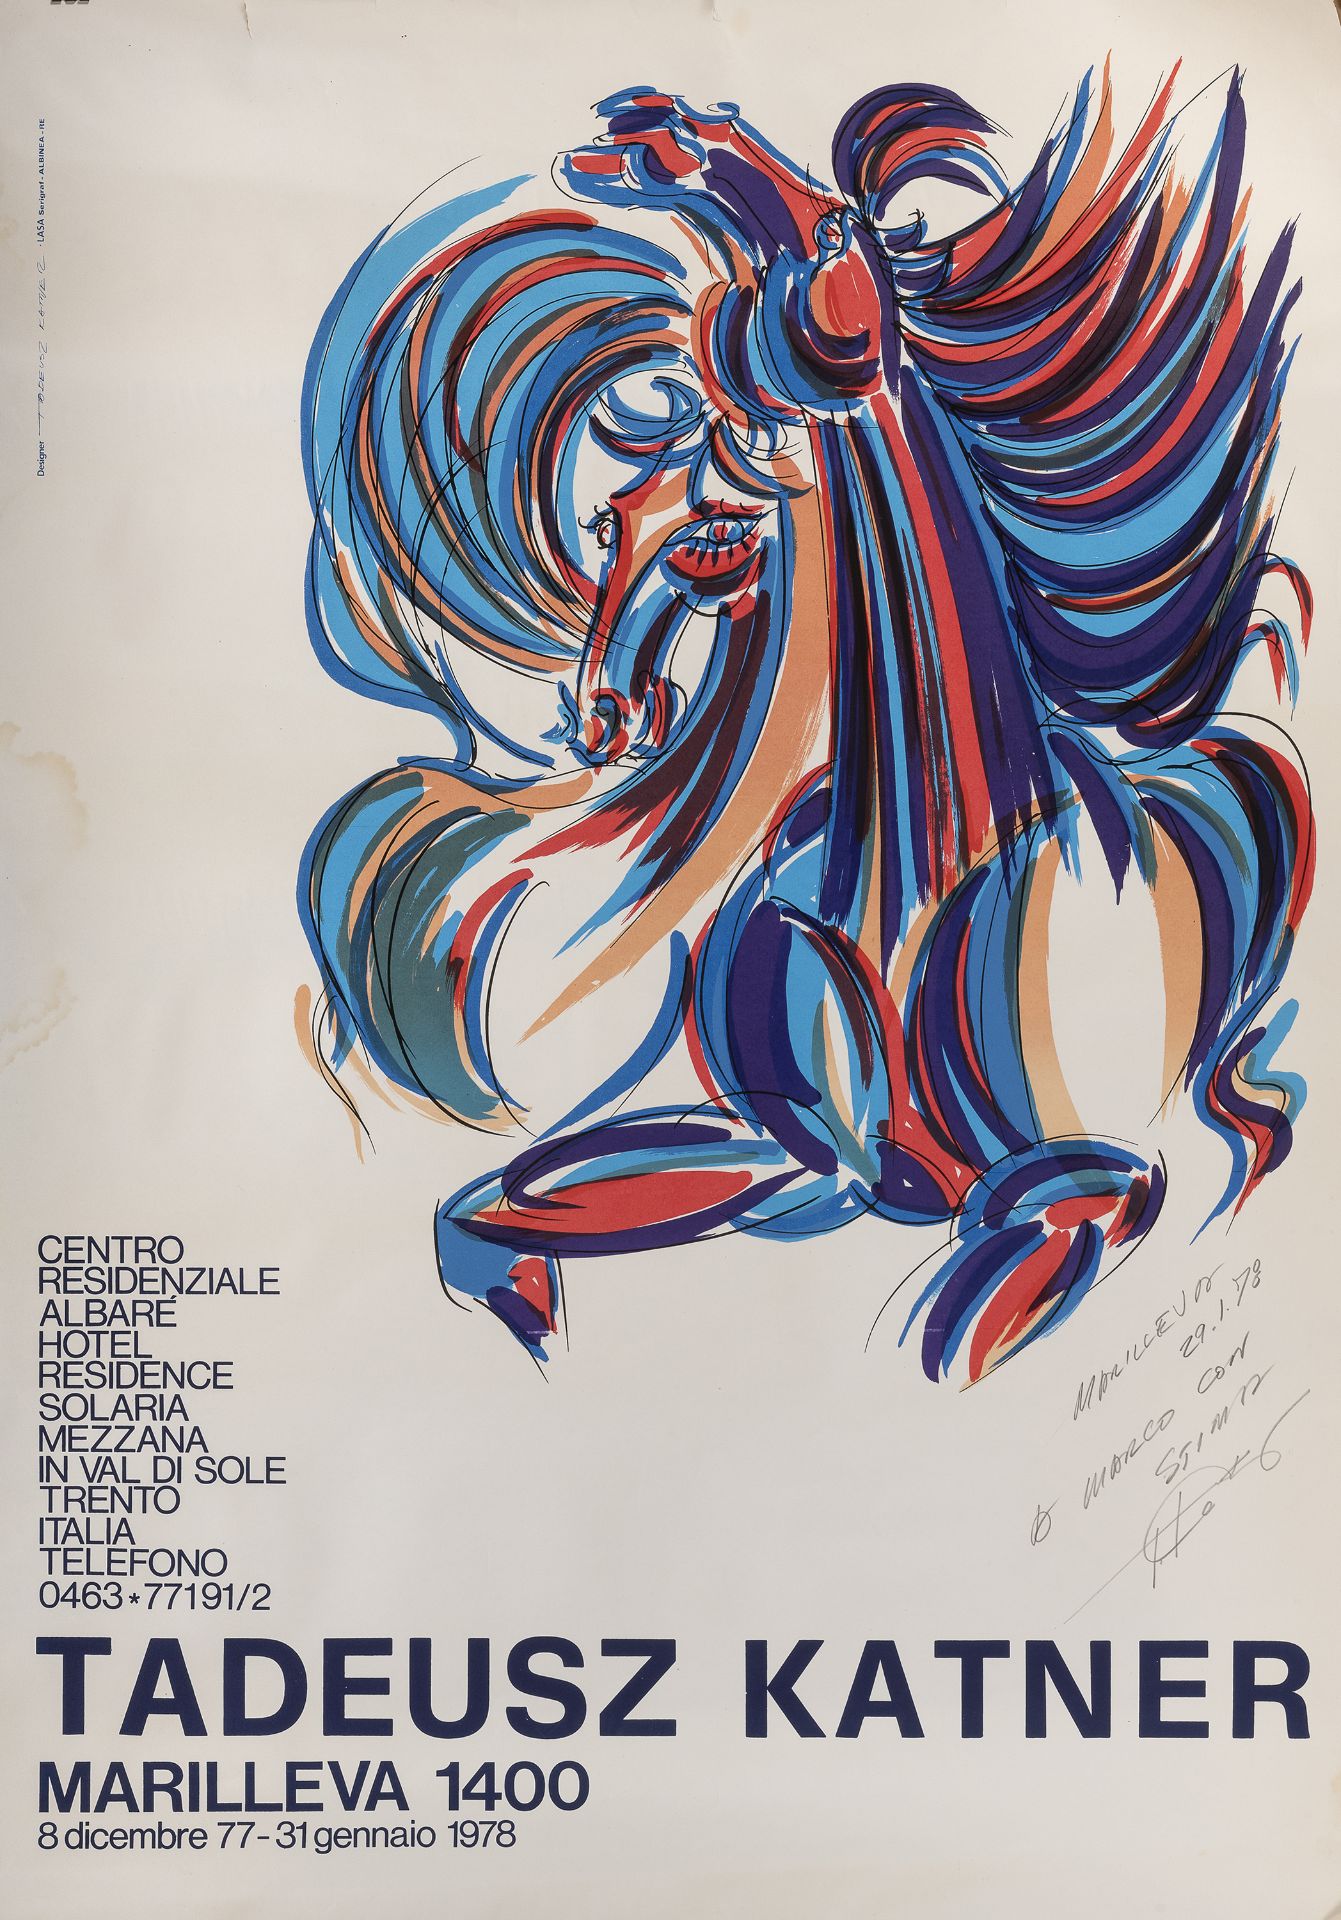 LITHOGRAPH AND POSTER BY TADEUSZ KATNER 1977 - Image 2 of 2